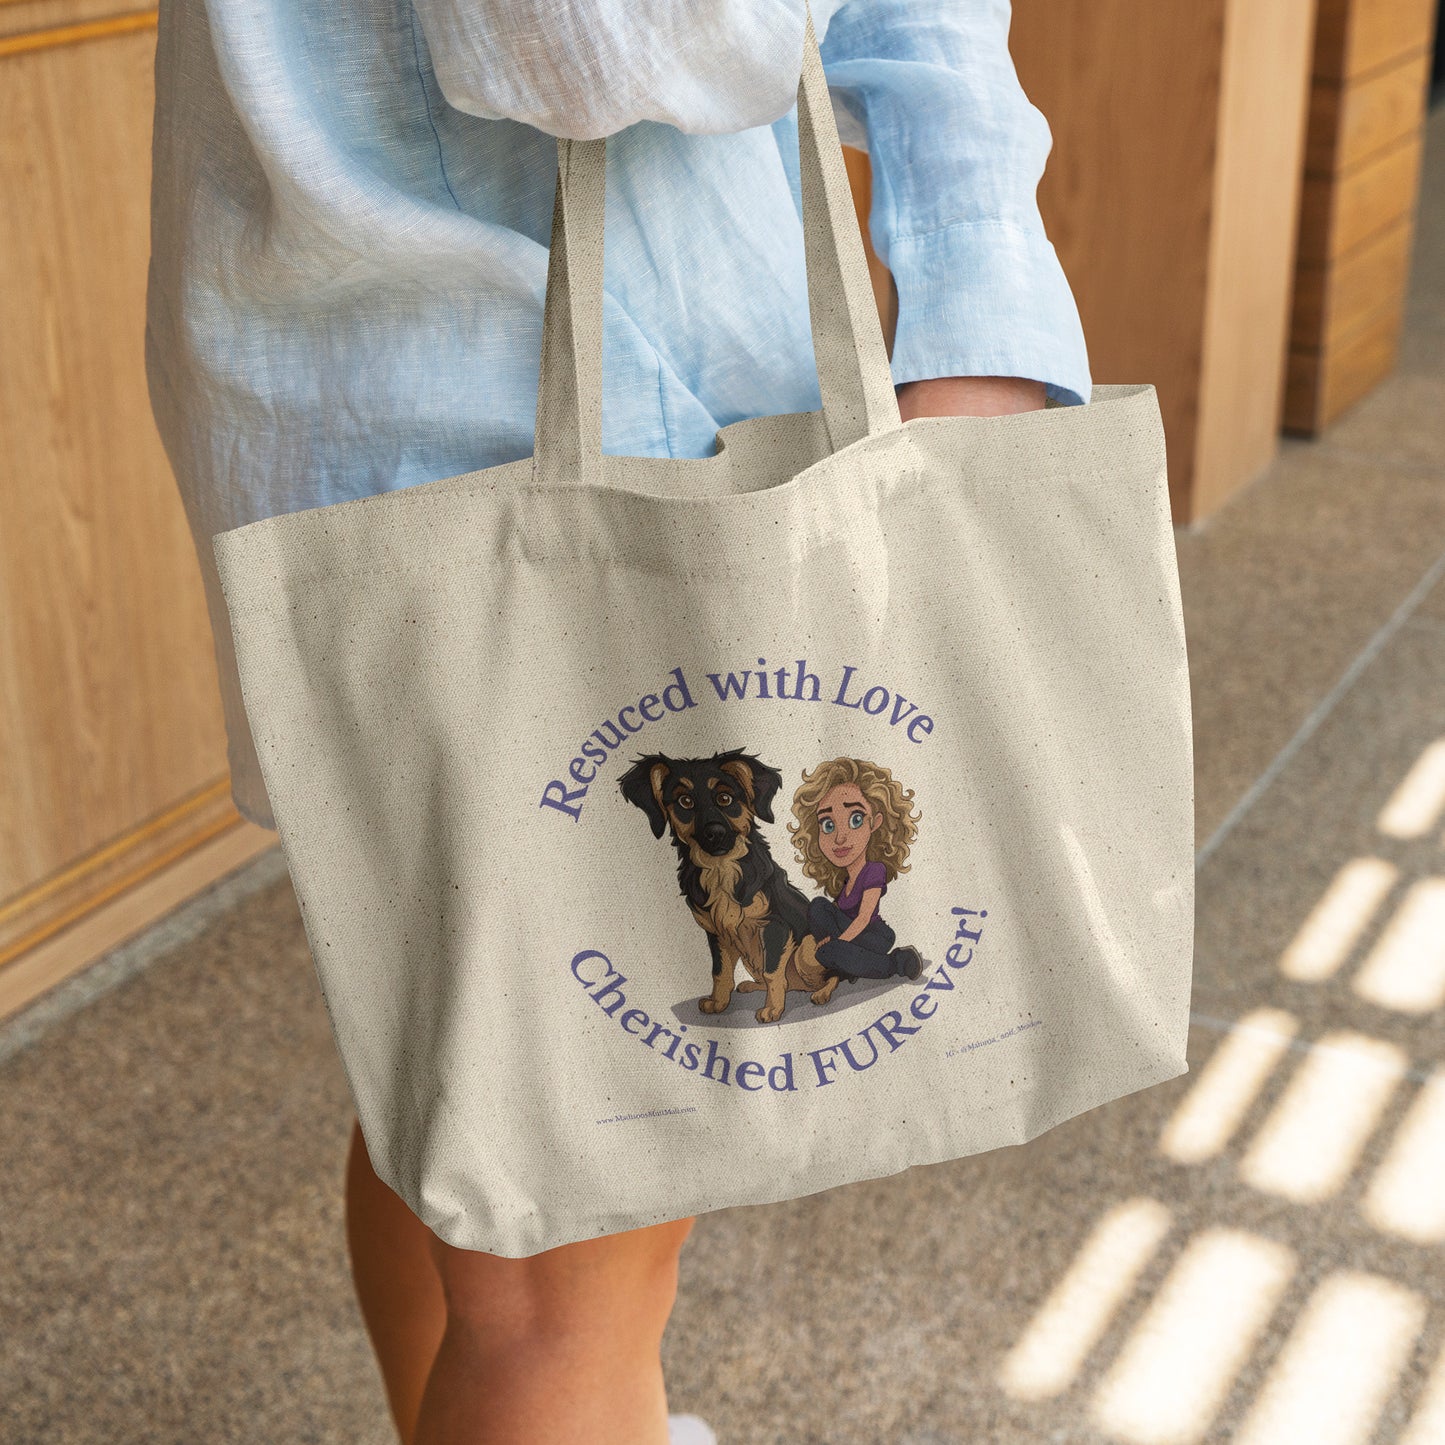 Rescued with Love, Cherished FURever Tote Bag